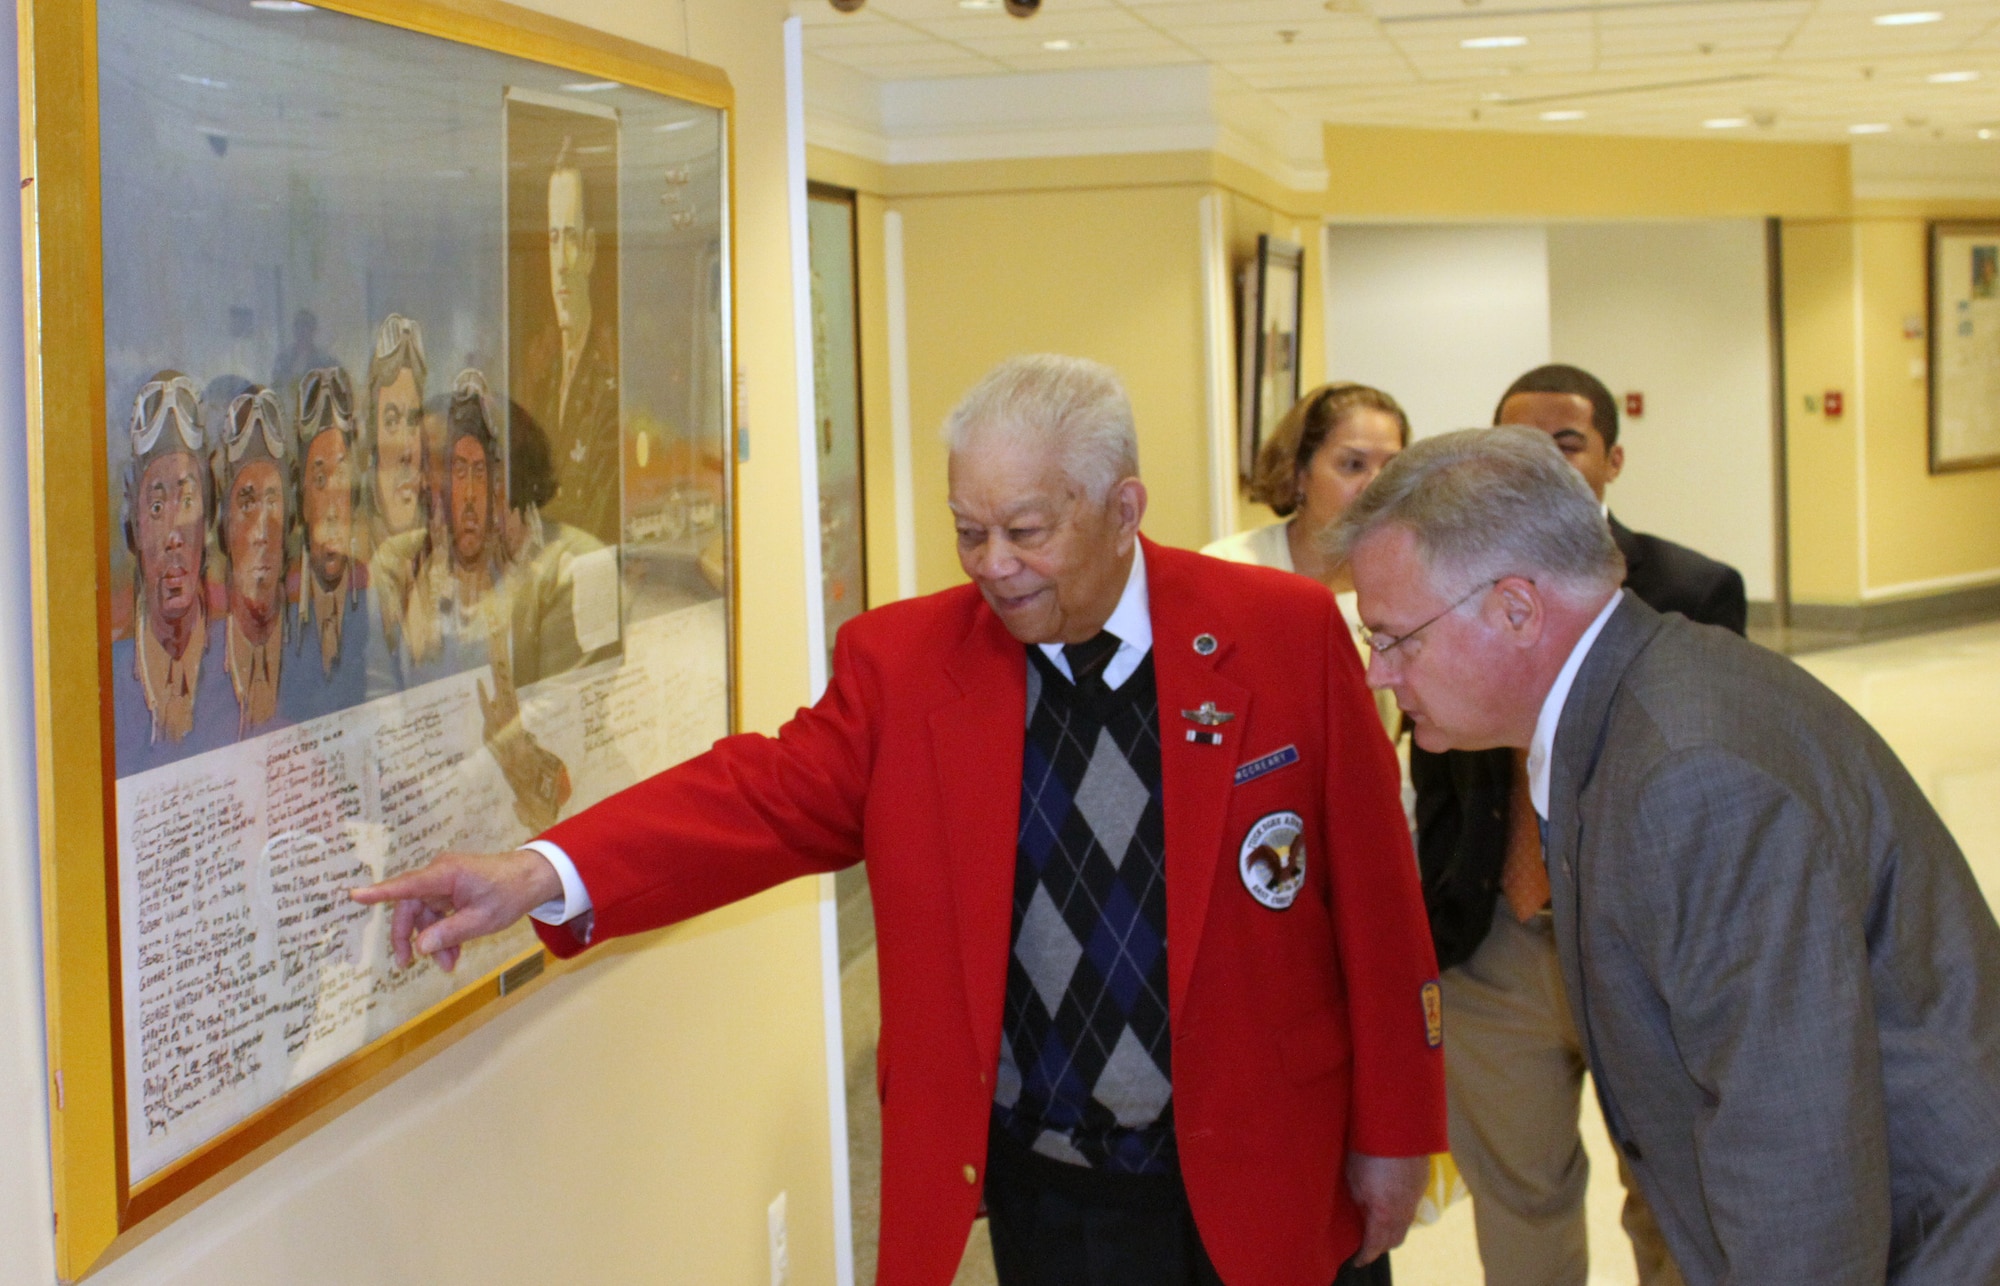 Retired Lt. Col. Walter McCreary points out the name of a fellow Tuskegee Airman to Russell Kirk, the director of the Air Force Art Gallery, during a visit to the Pentagon on March 16, 2012. McCreary, a member of the Tuskegee Airmen, conducted 89 combat missions during World War II. (U.S. Air Force photo/Lou Timmons)